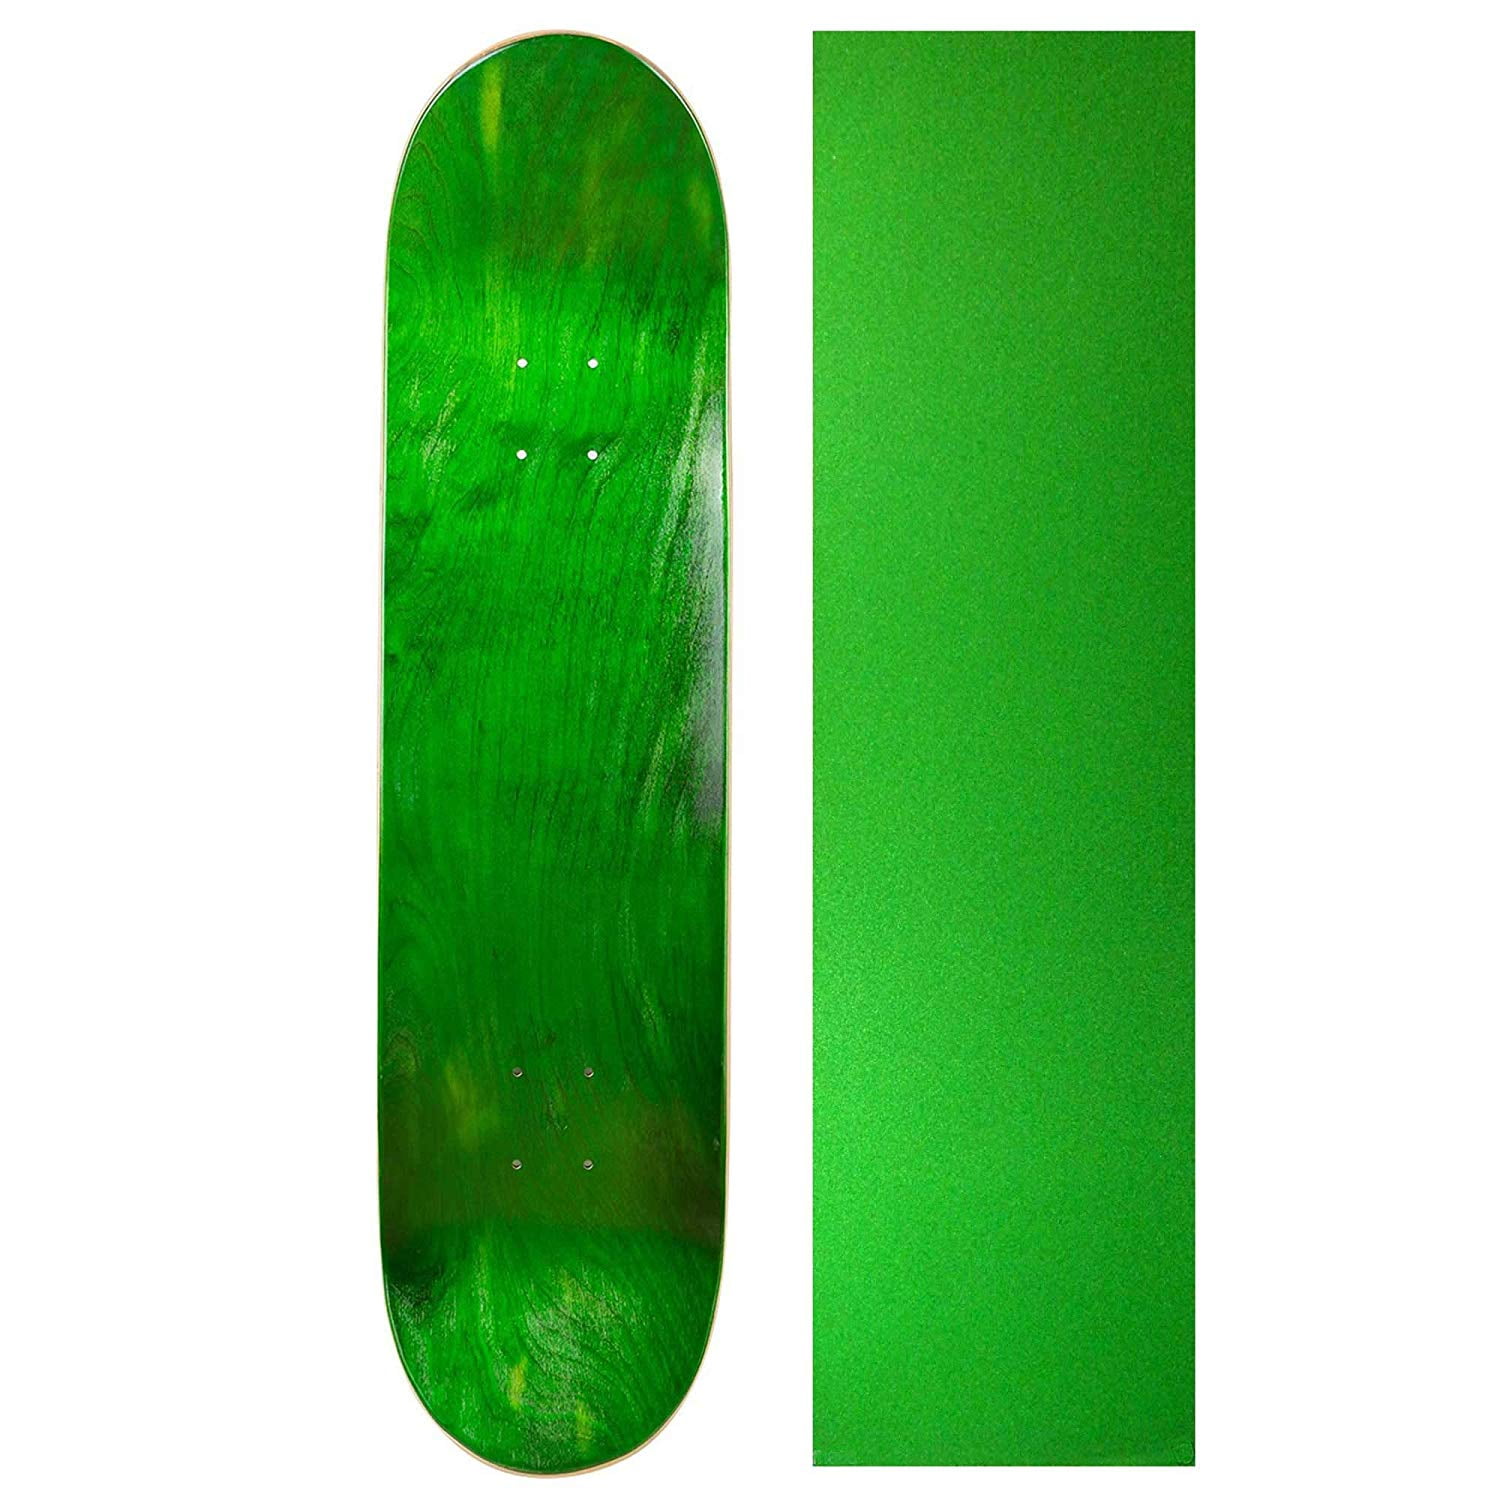 Cal 7 Blank Maple Skateboard Deck 8.25" with Mob Grip Tape Multi-Colors Set